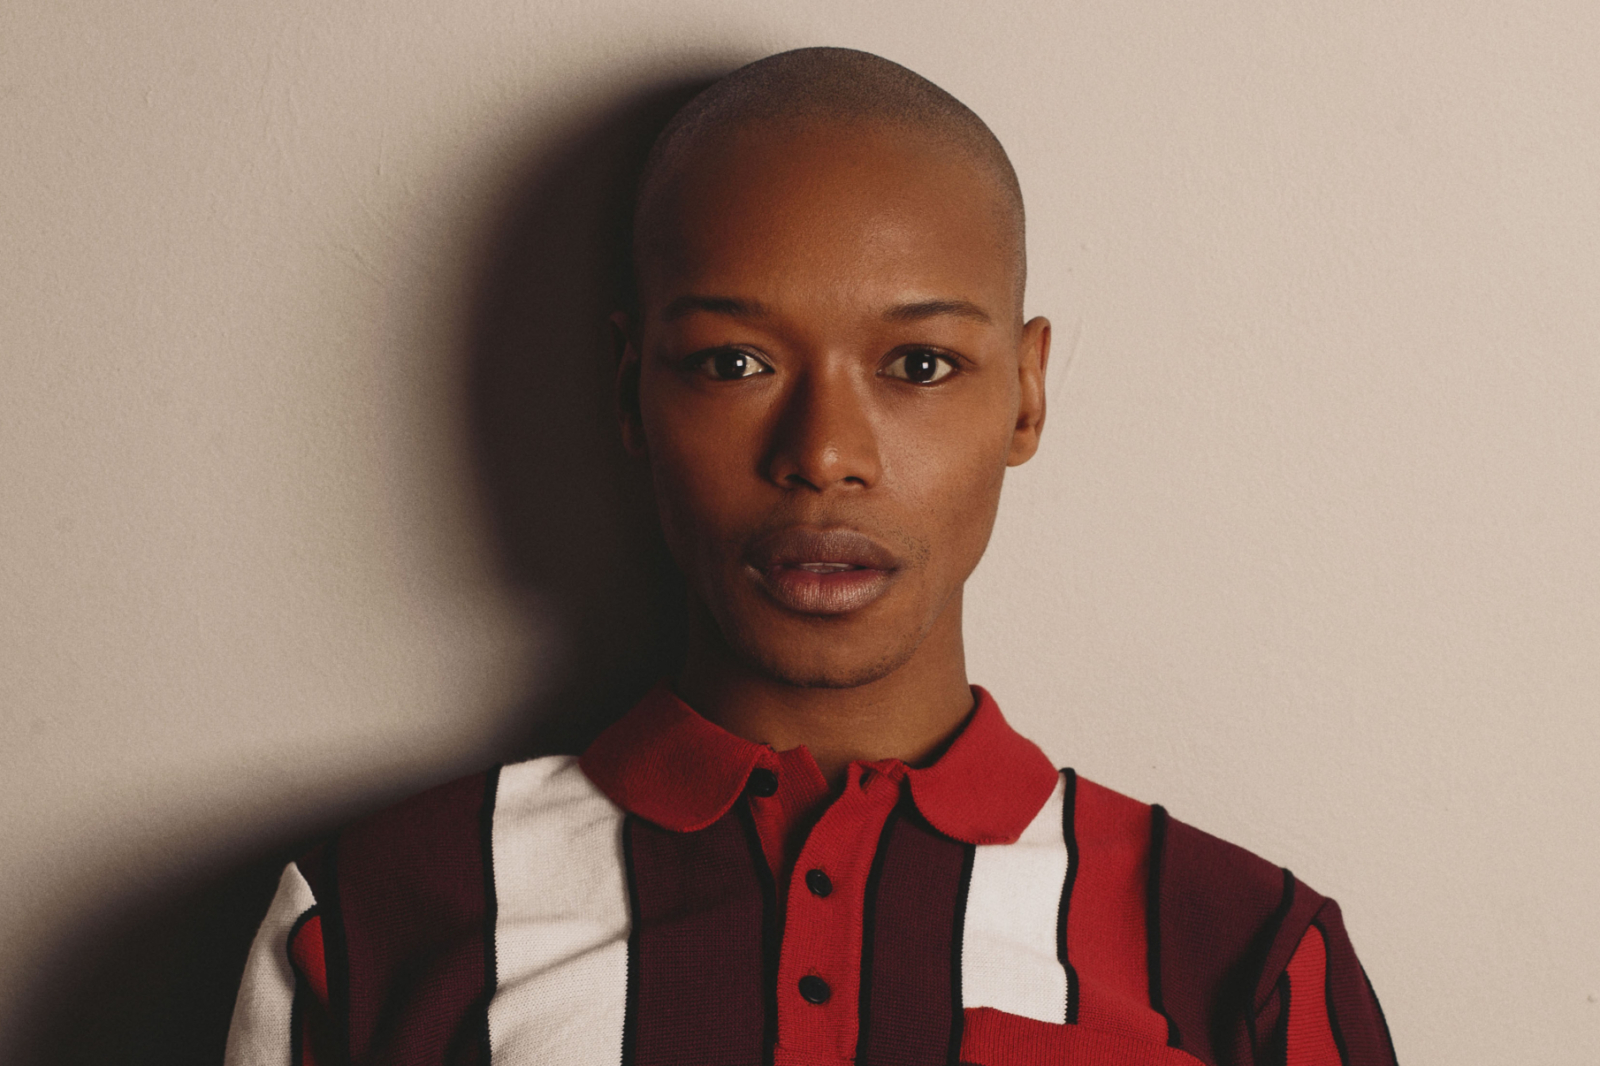 The time for moving on: Nakhane